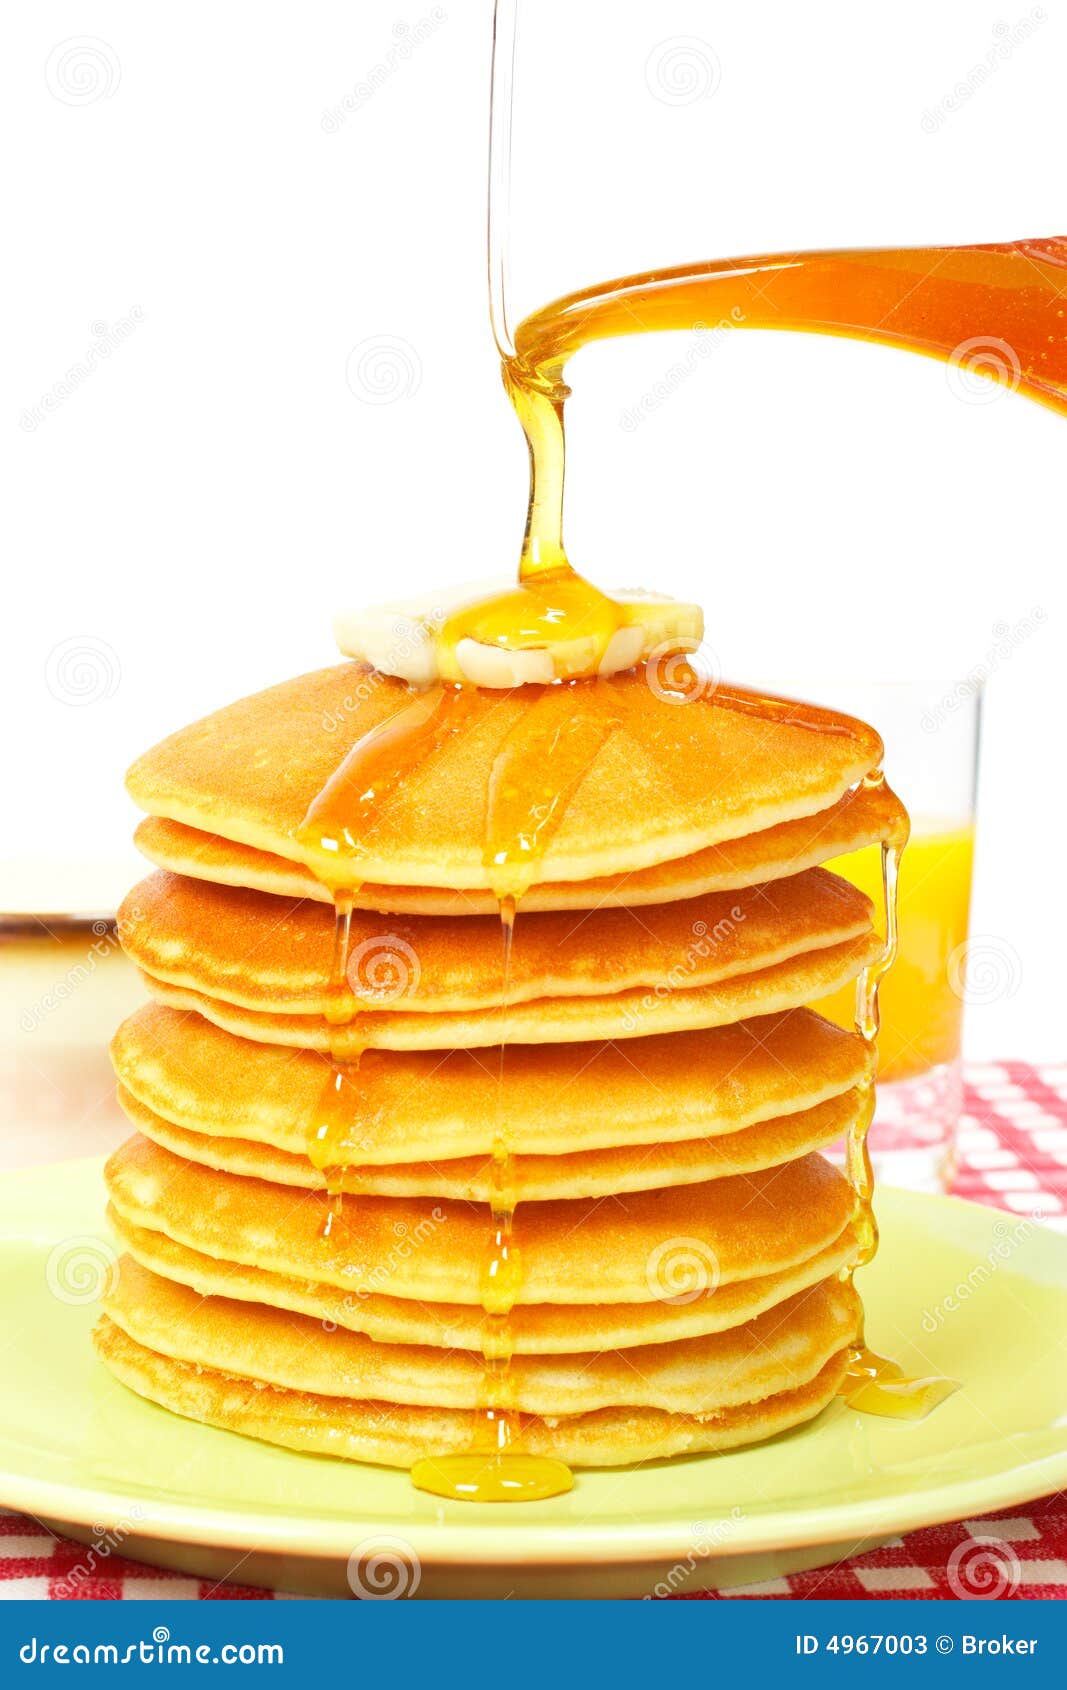 pouring syrup on the pancakes